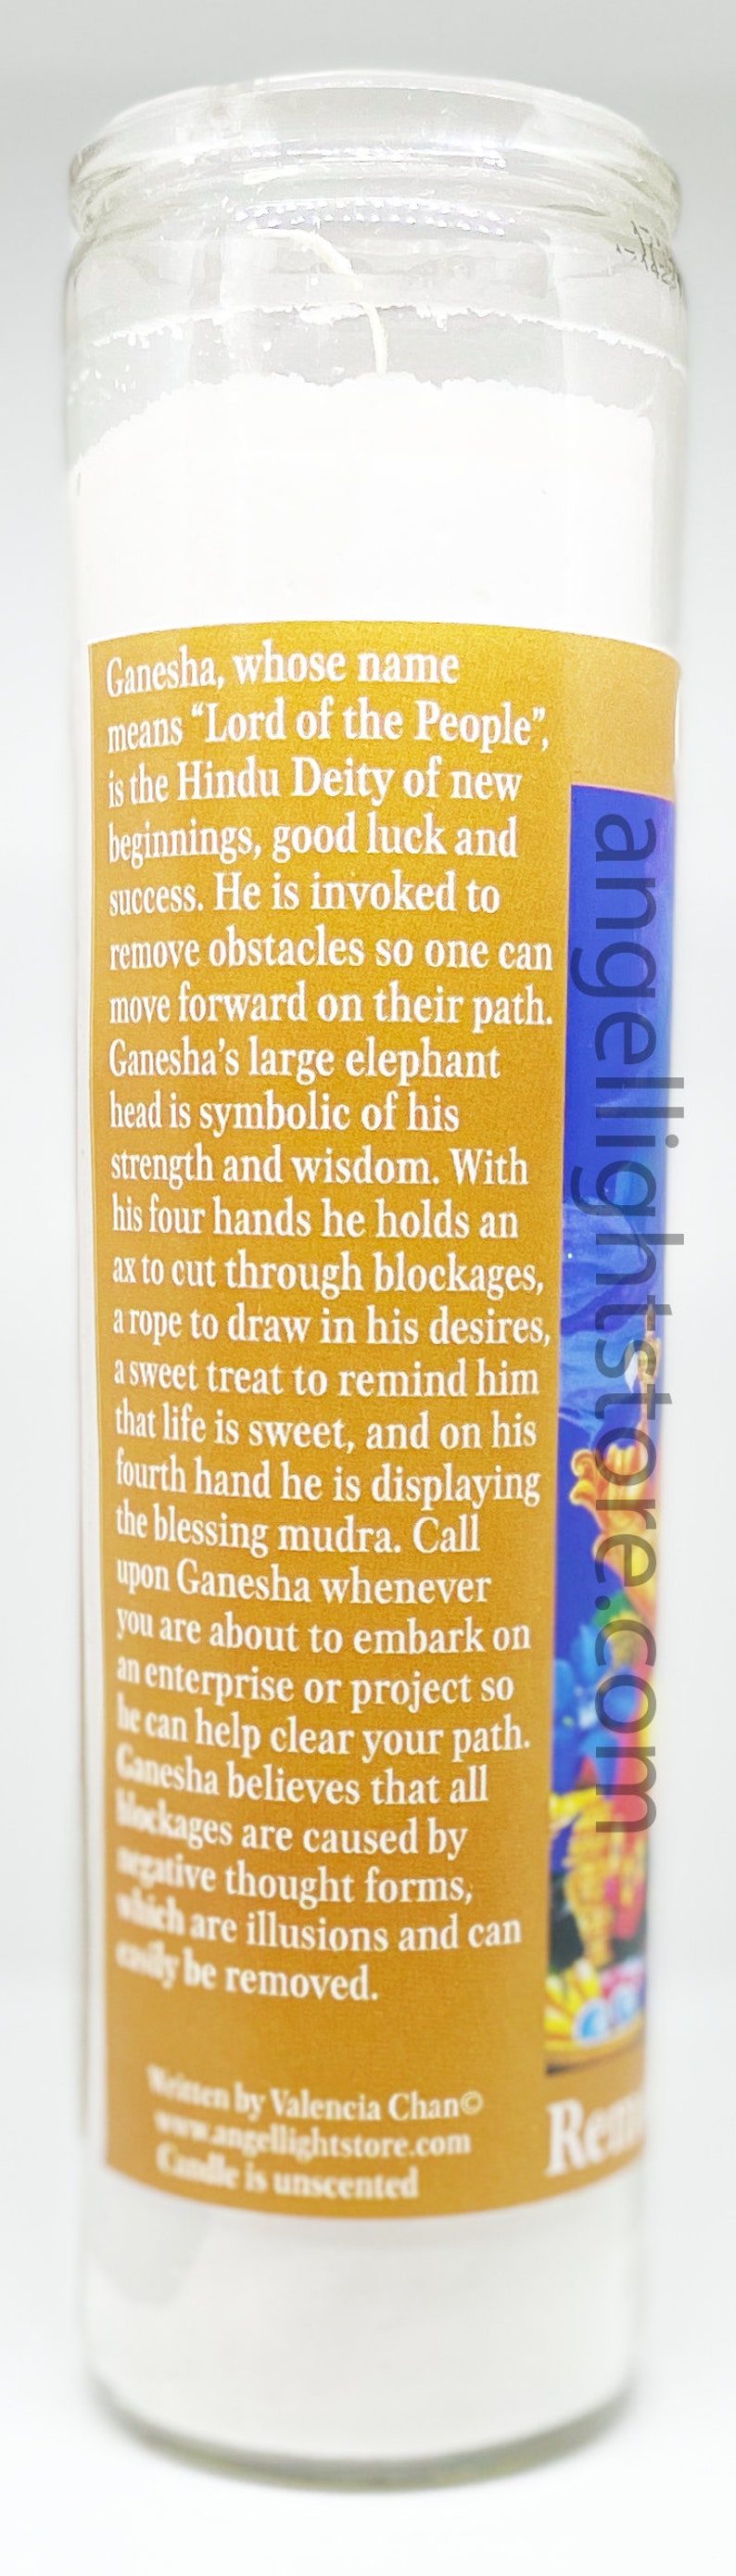 Ganesha Candle hindu deity indian religion remover of obstacles gift eastern spirituality chinese religion success new beginning image 3